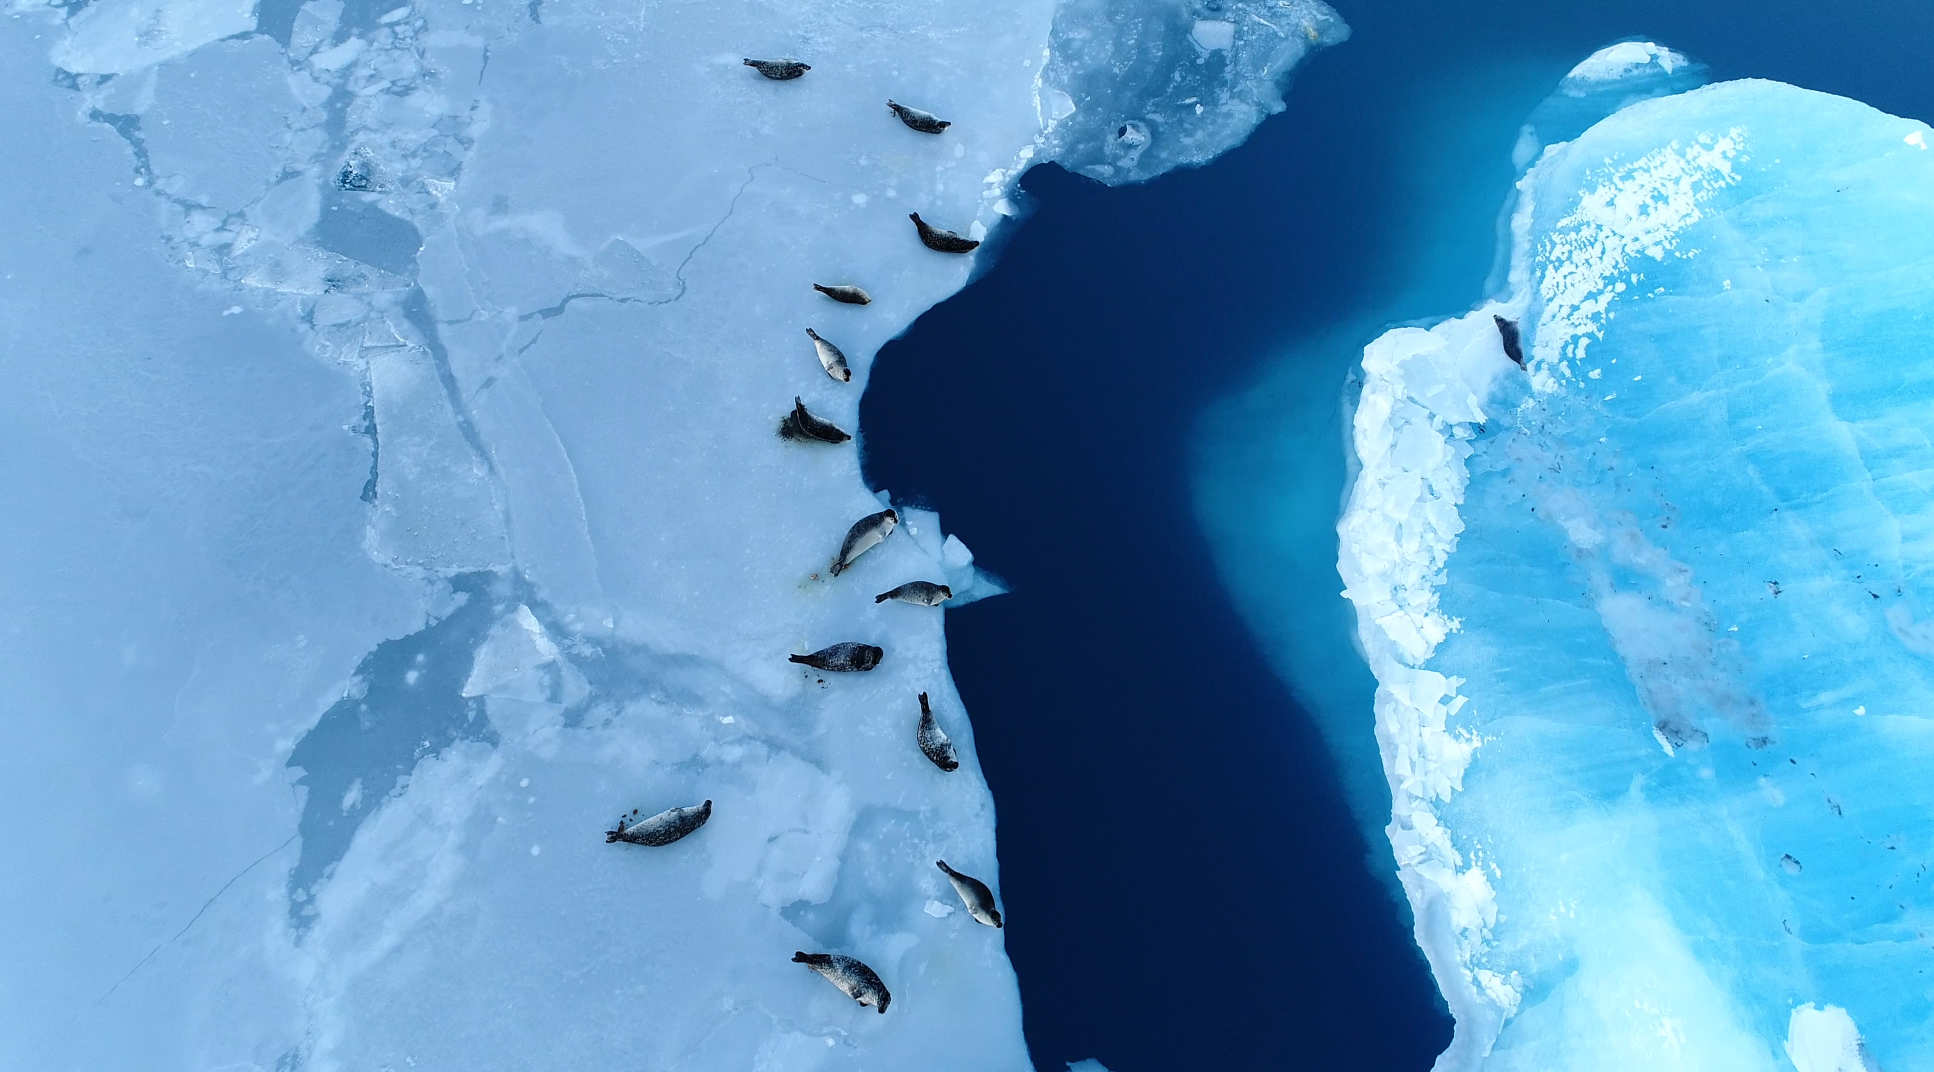 Aerial view of seal on ice floes